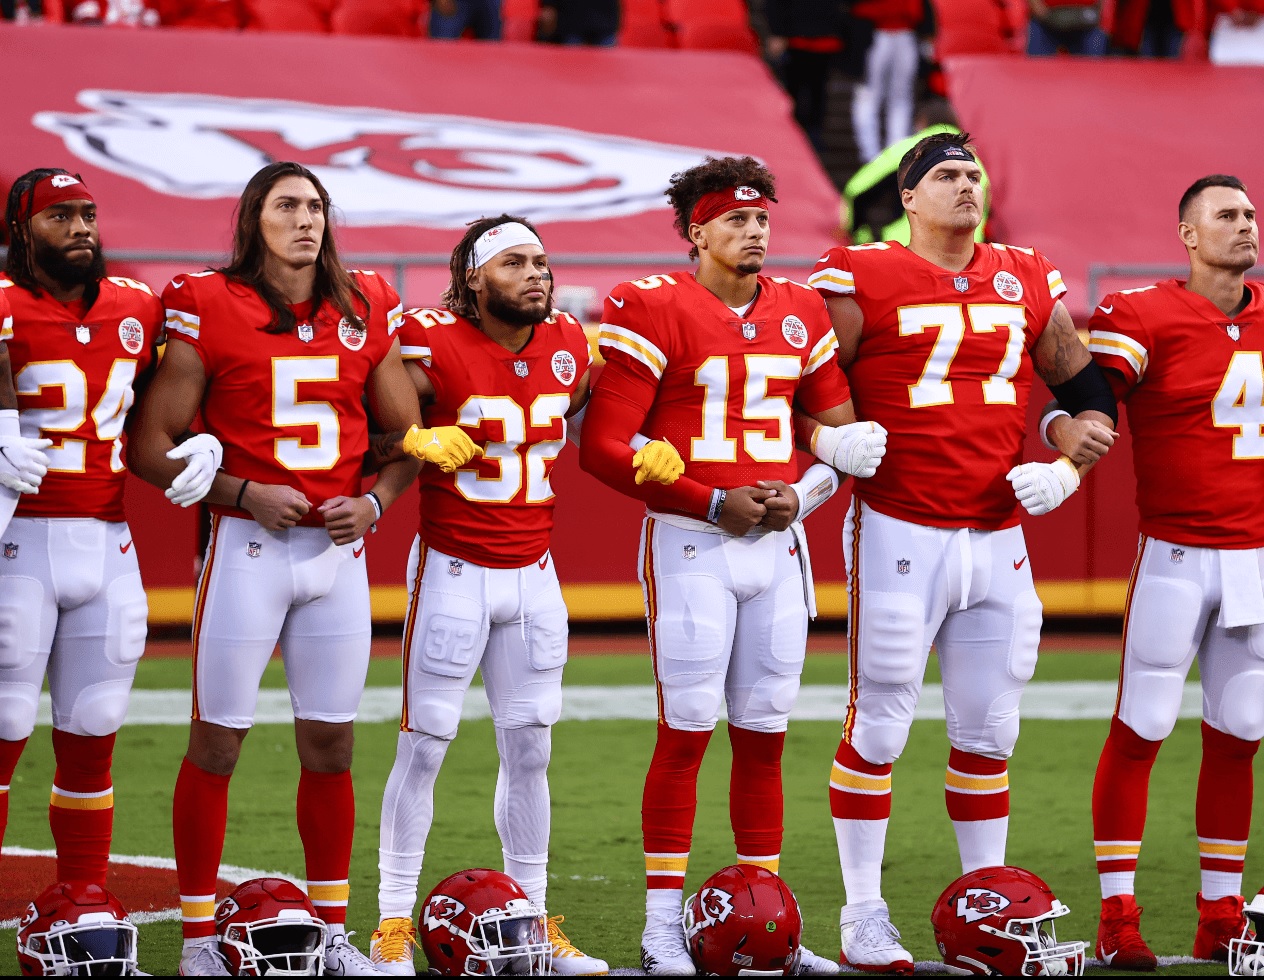 Patrick Mahomes and the Kansas City Chiefs have some famous fans